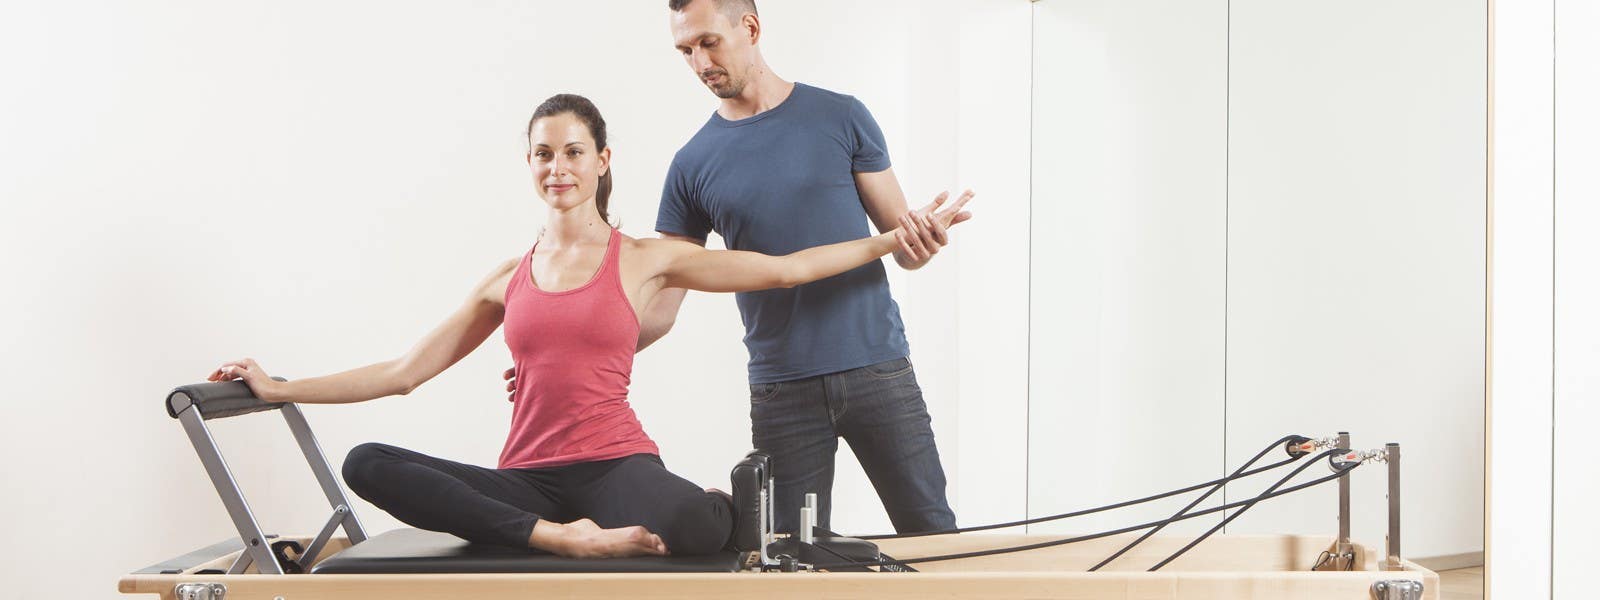 A Pilates instructor demonstrates how to 'turn on' your abs by BREATHING